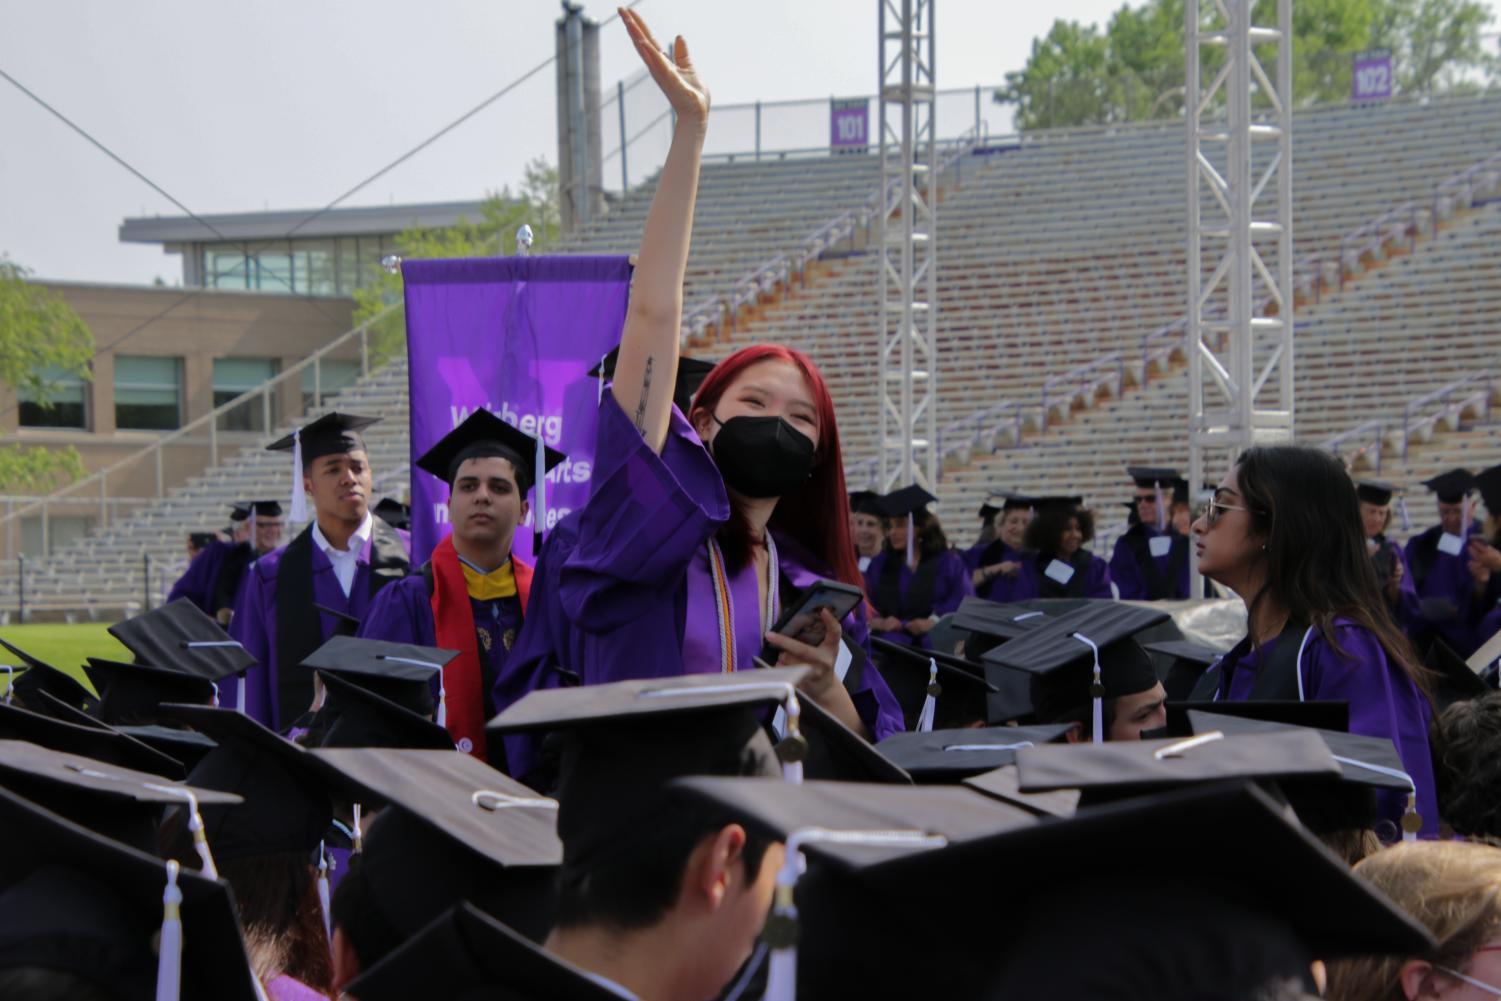 A student in a cap and gown raises their arm up amid a sea of graduation caps.